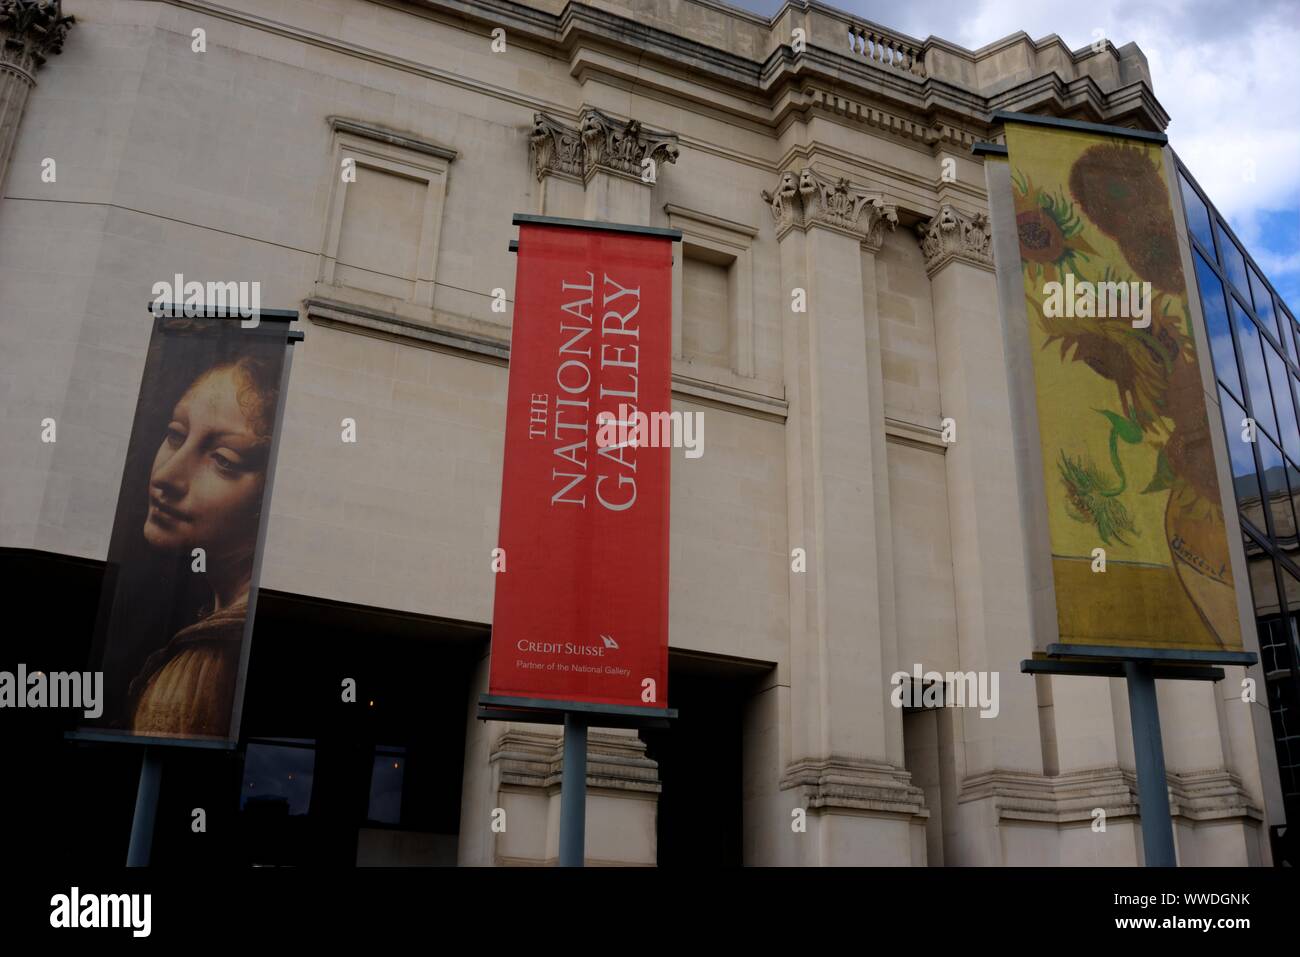 Trafalgar Square, London, United Kingdom - September 7, 2019: Close up of banners indicating entrance to National Gallery Stock Photo